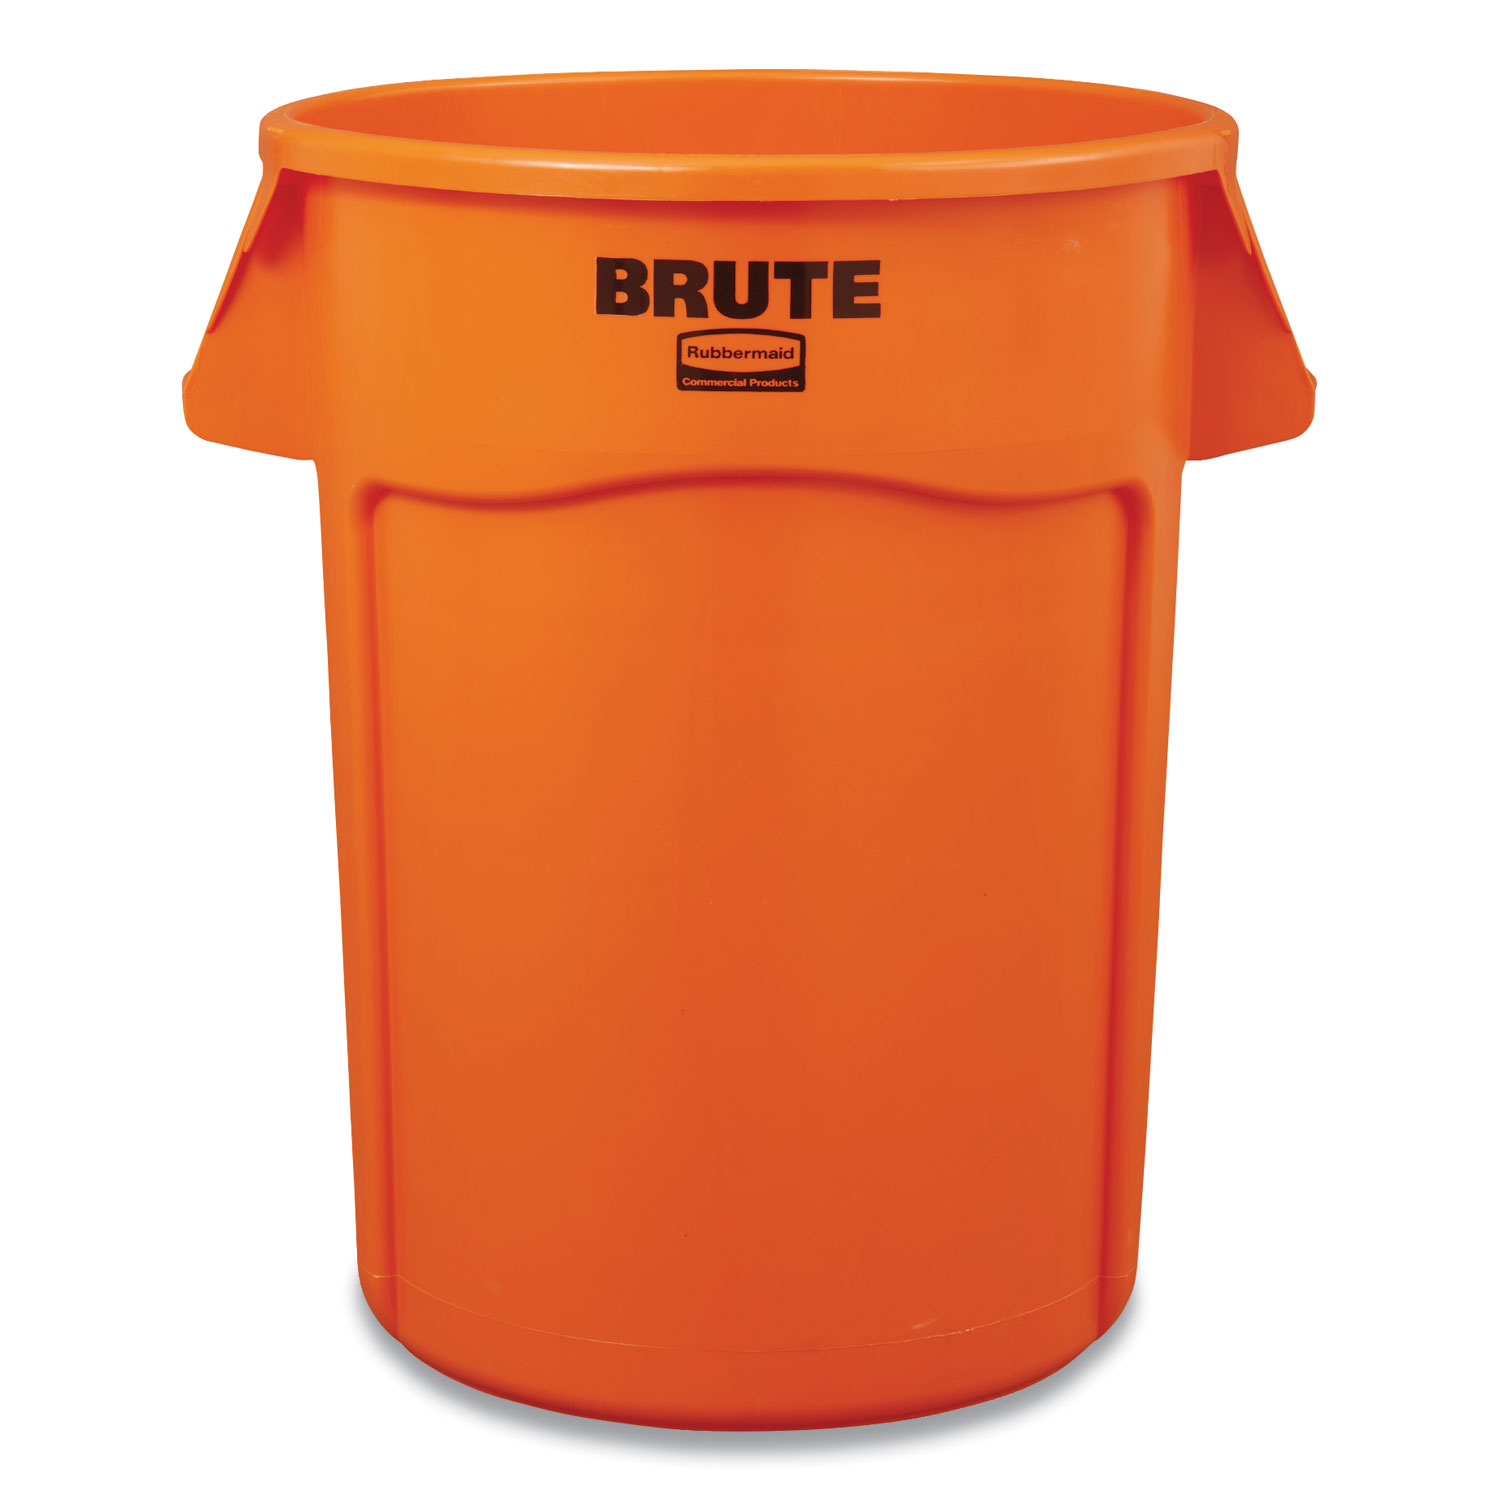 Rubbermaid® Commercial Brute Round Containers, 44 gal, Orange